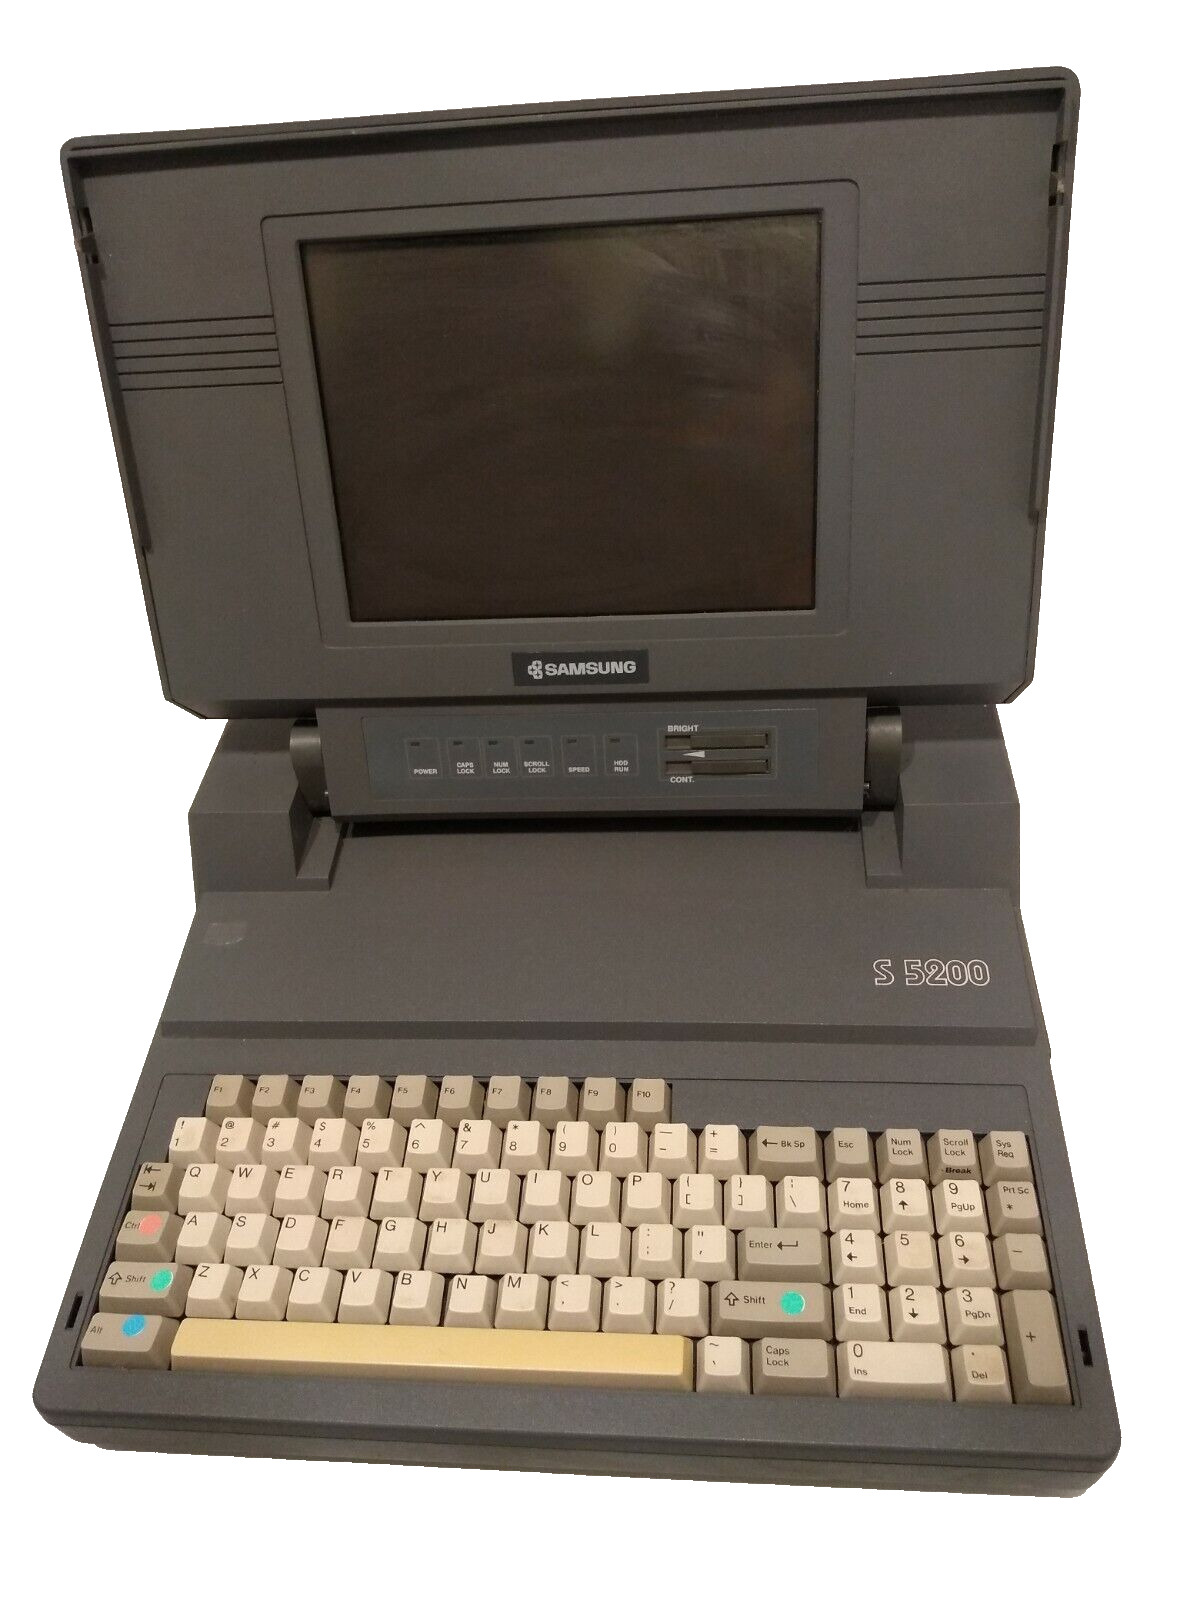 VINTAGE SAMSUNG 80's Laptop Computer SAMSUNG S 5200 VERY COLLECTIBLE AND RARE